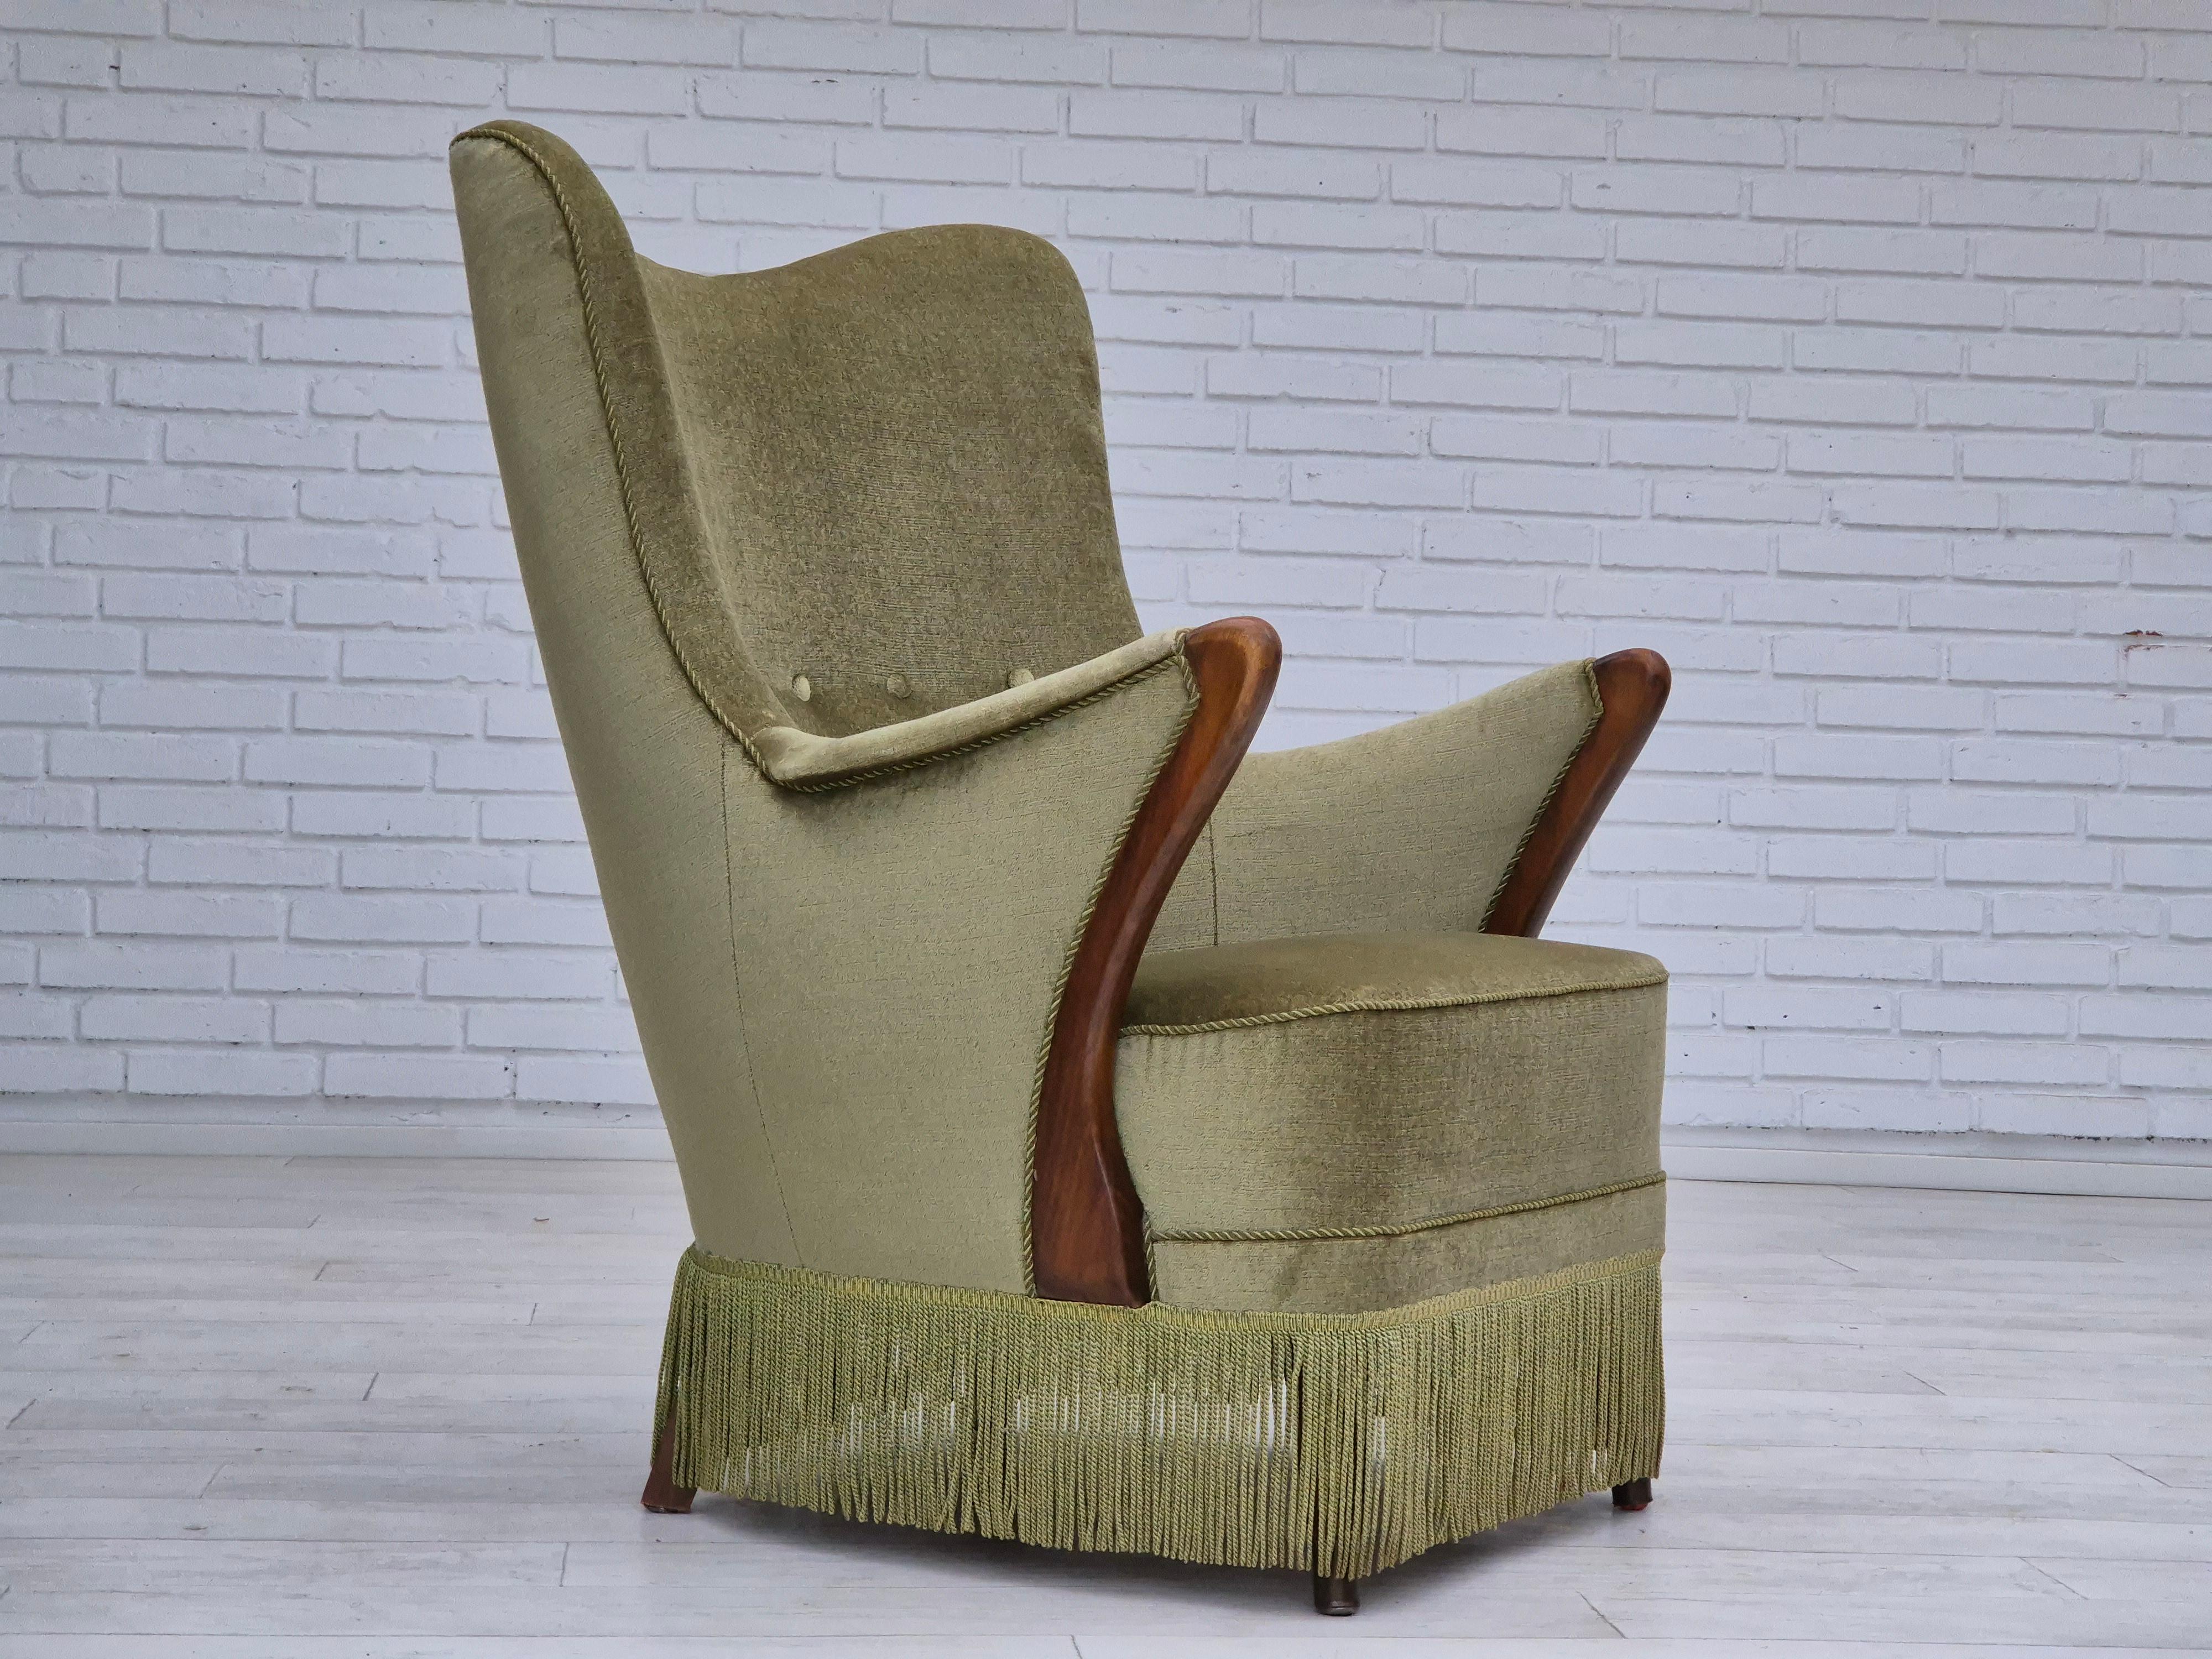 1960s, Scandinavian design. Armchair in original very good condition: no smells and no stains. Light green furniture velour, beech wood legs with brass plugs. Brass springs in the seat. Beech wood legs and armrests. Manufactured by Danish or Swedish